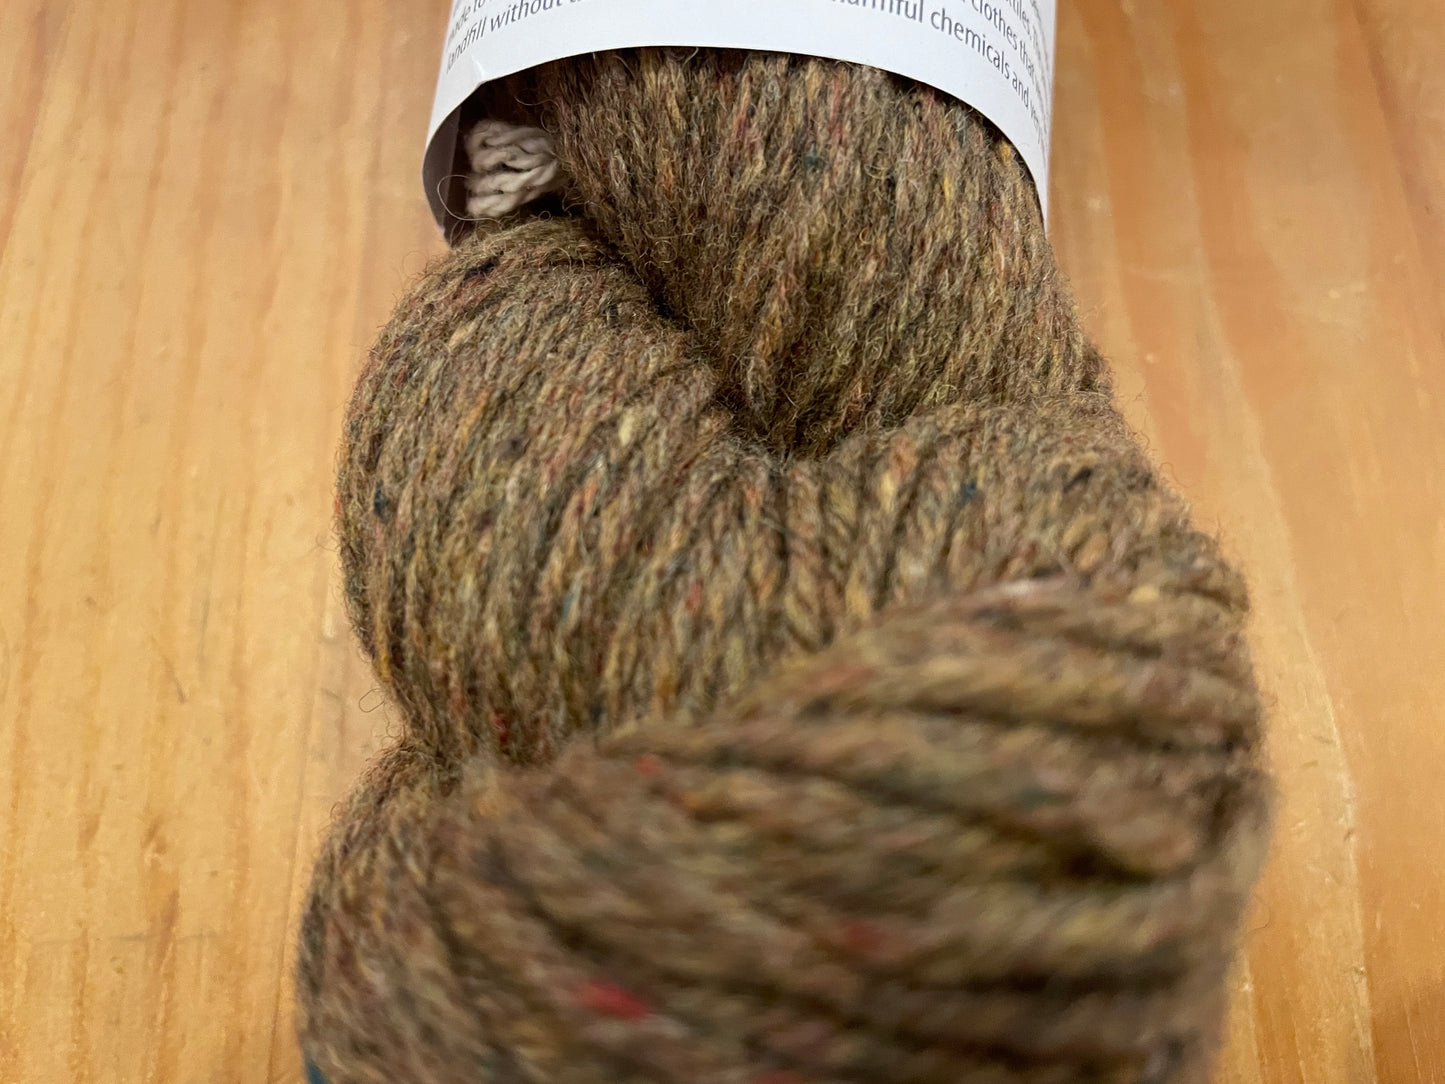 Reborn Yarn - Recycled Wool Blend - DK Weight - 3 Colors